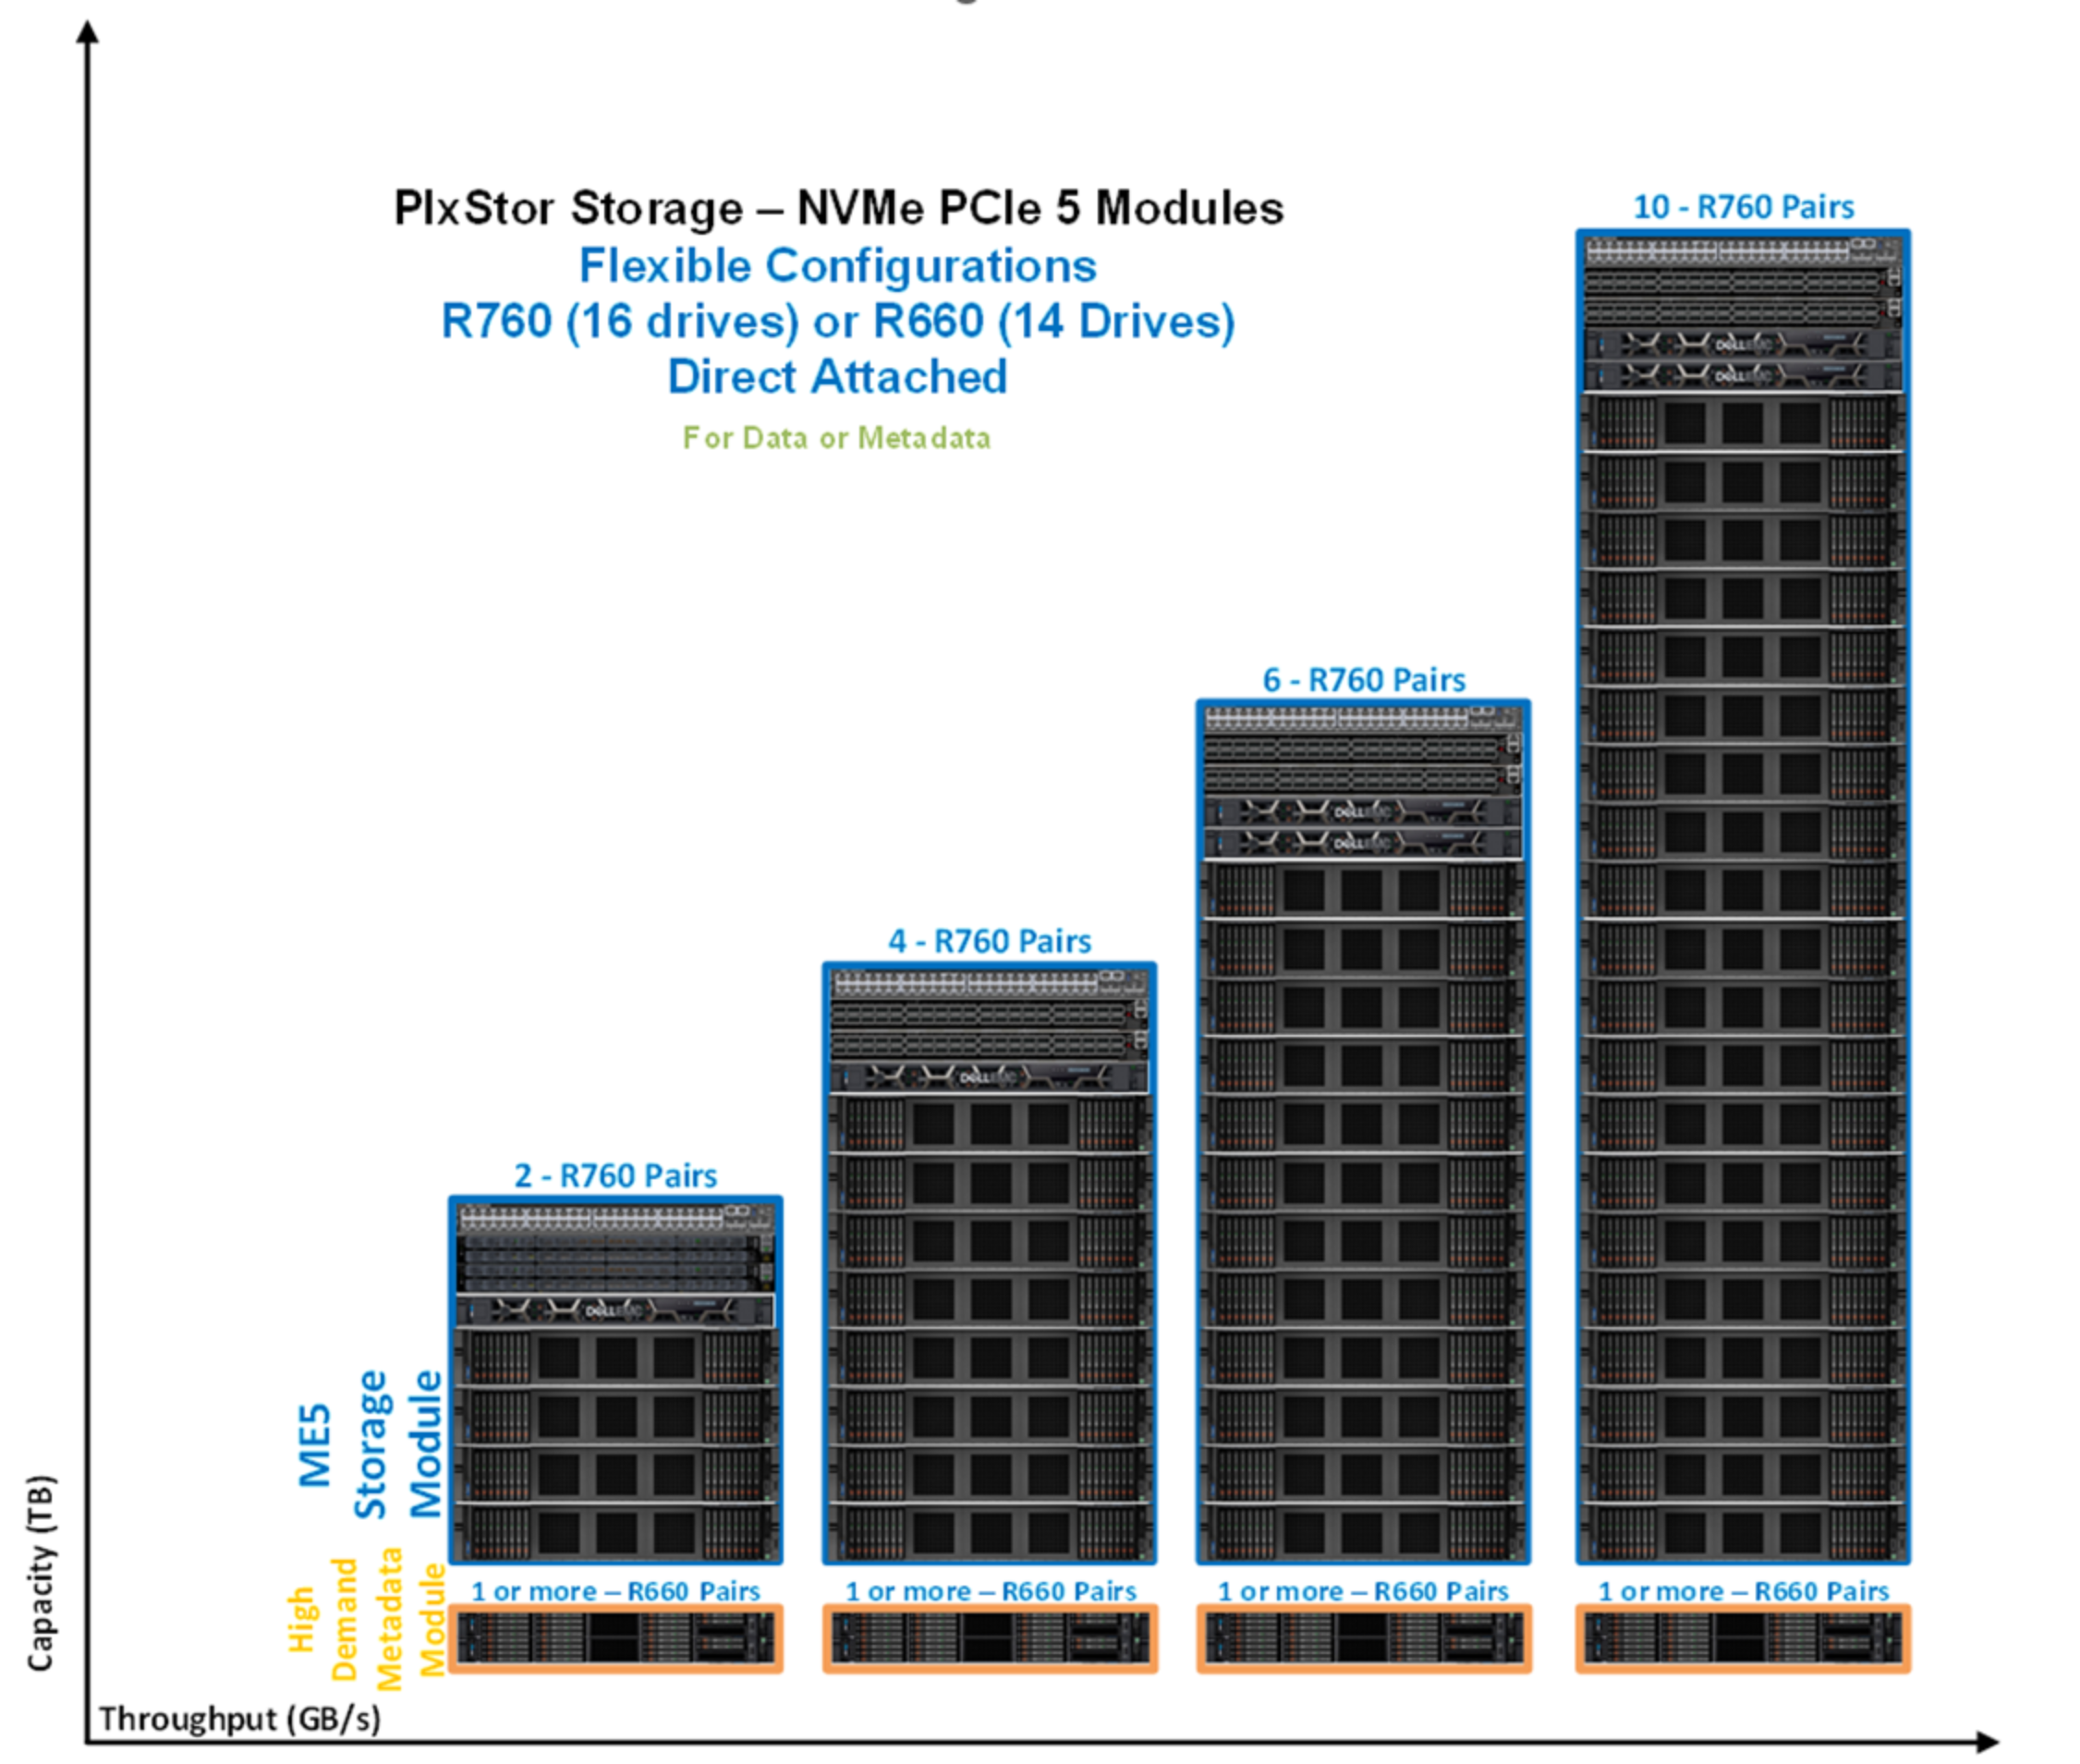 Figure showing the ME5 storage module made up off 2, 4, 6, and 10 PowerEdge R760 pairs.